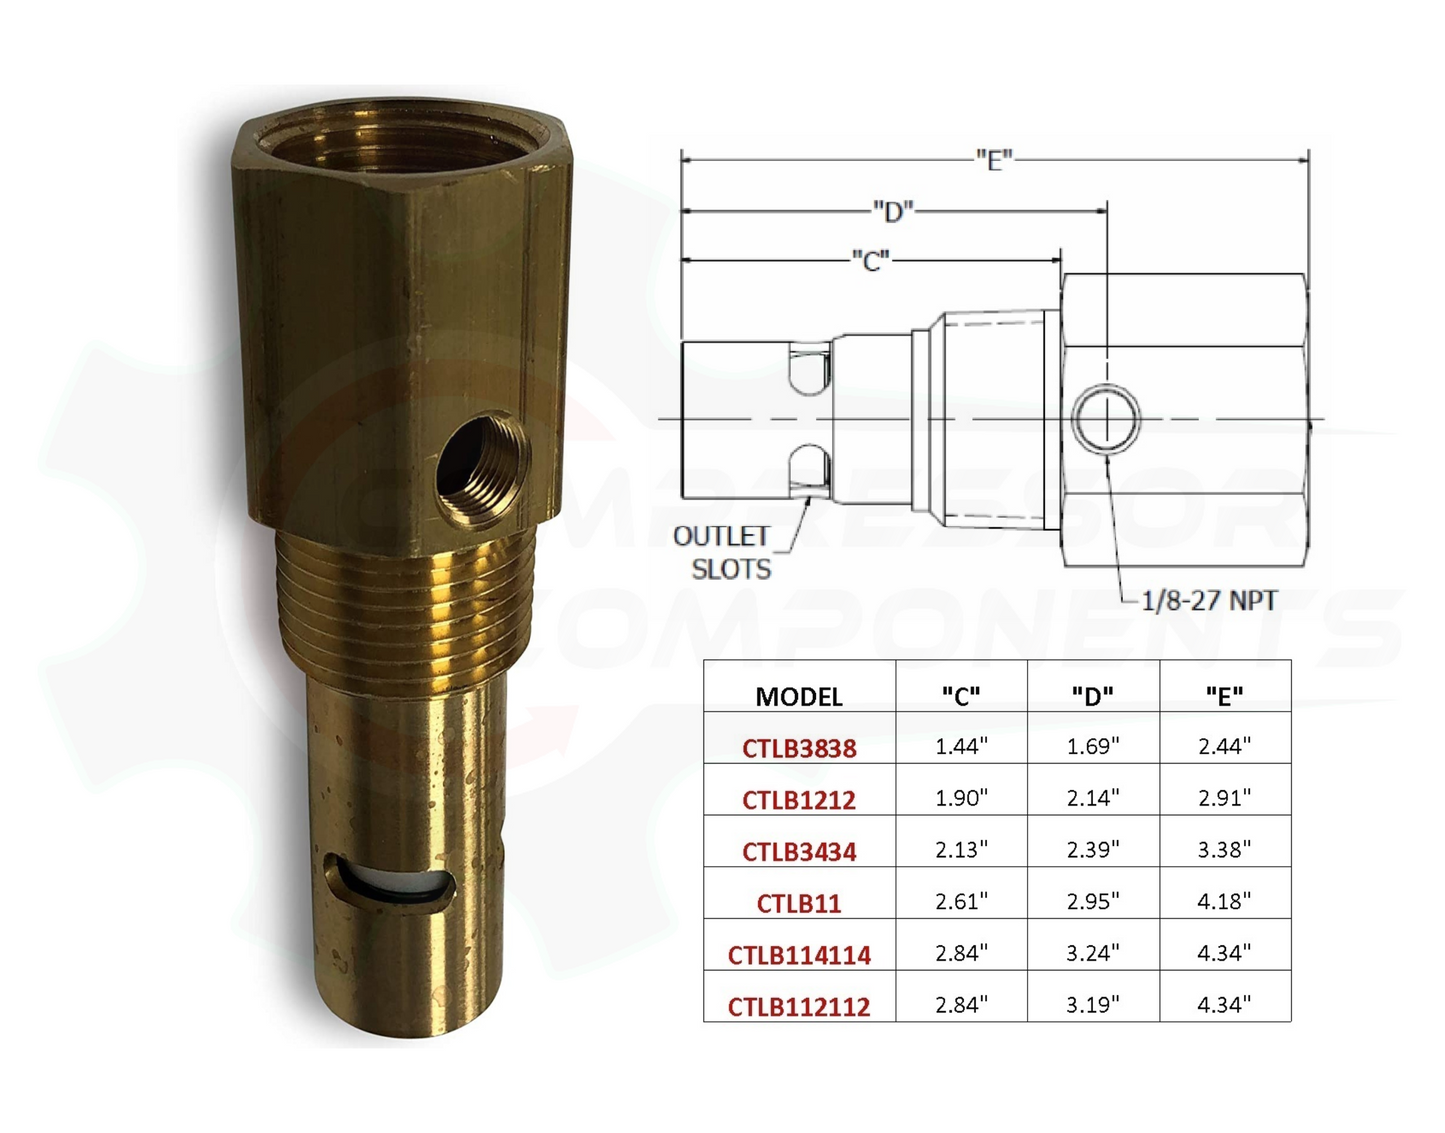 DISCHARGE IN TANK CHECK VALVE 3/4" FNPT INLET x 3/4" MNPT OUTLET W\ DOUBLE 1/8" FNPT UNLOADER PORTS